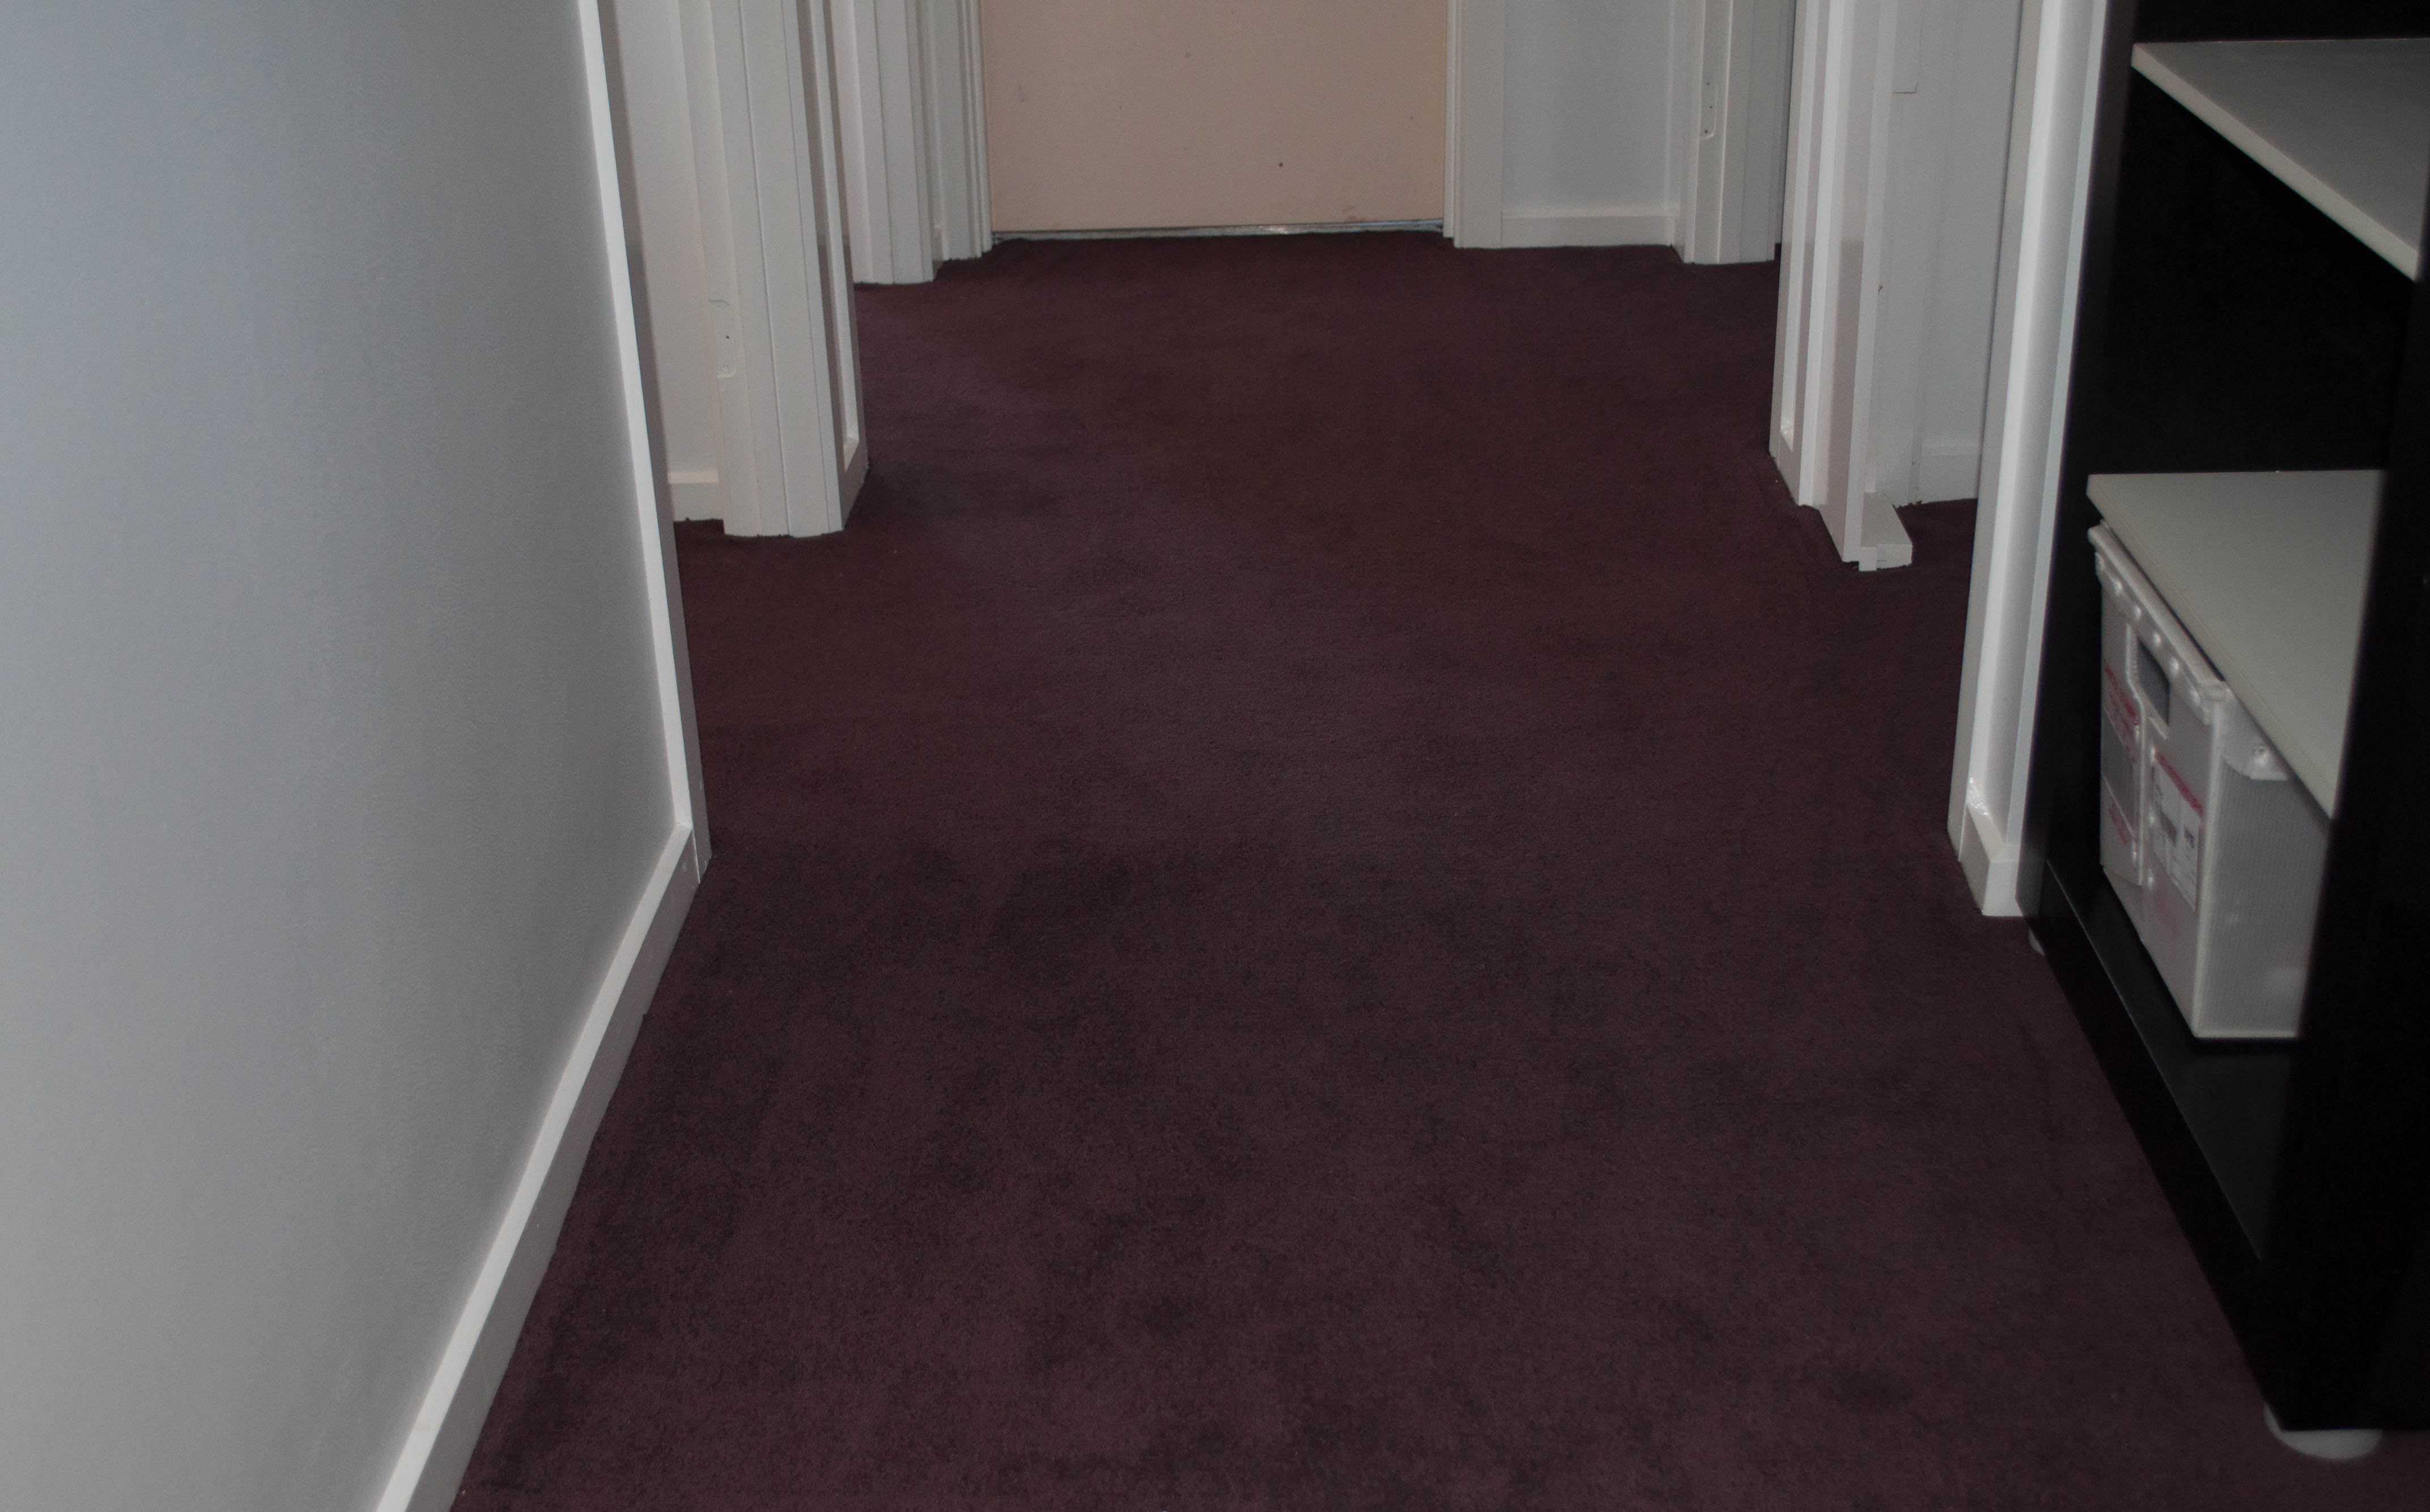 The carpet laying process is completed here. The carpet is a plain twist pile wool carpet of aubergine color and the wall of this wide------
 passage is a lavender grey color.The home is in the suburb of Melton Vic 3337 and the laying of the carpet is being done by Concord Floors.